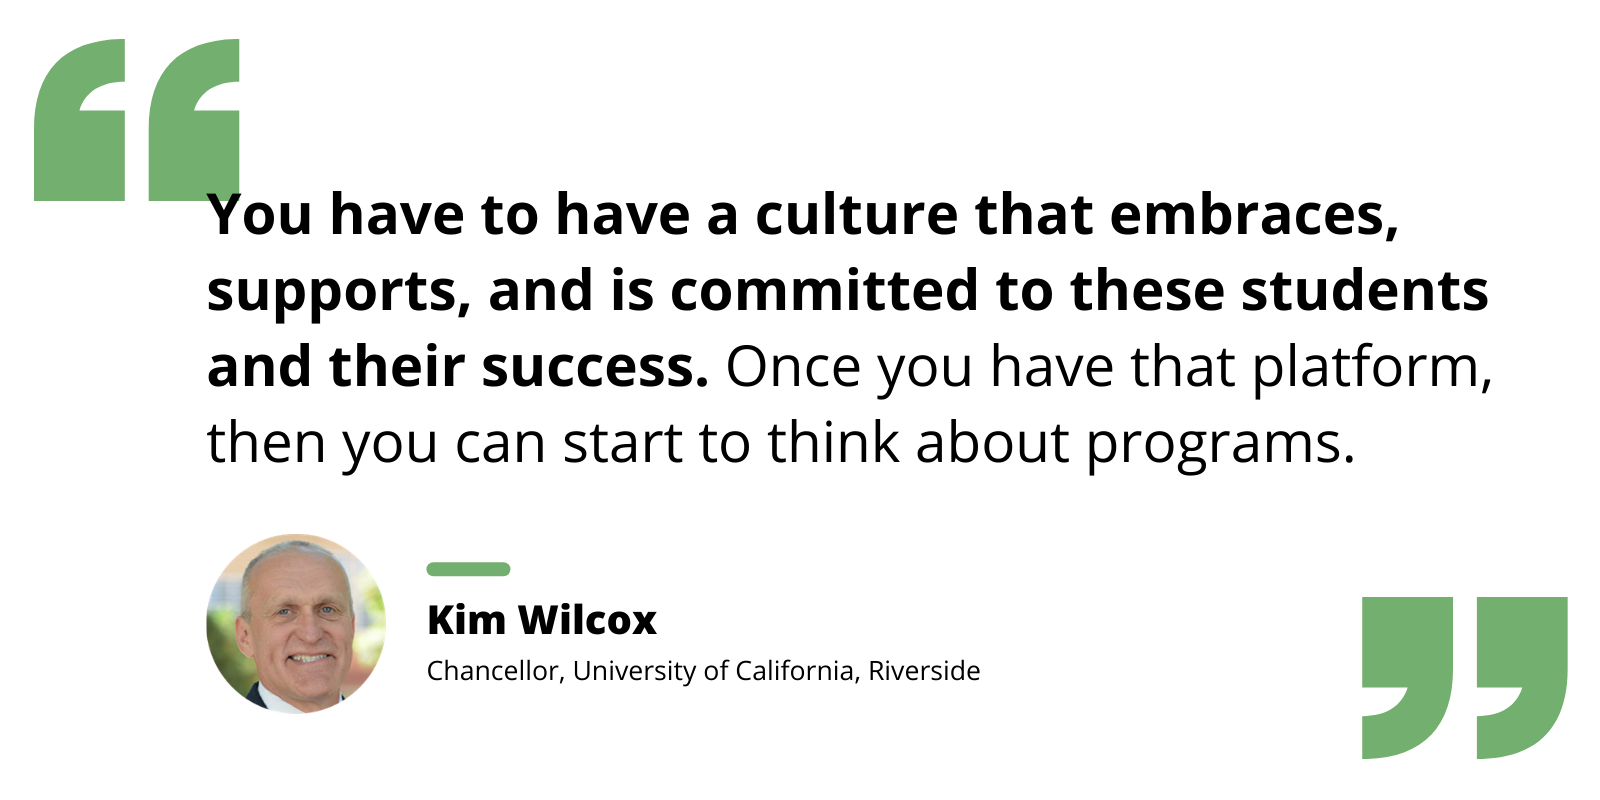 Quote by Kim Wilcox re: the need for supportive campus culture as the basis for any program focused on student success.